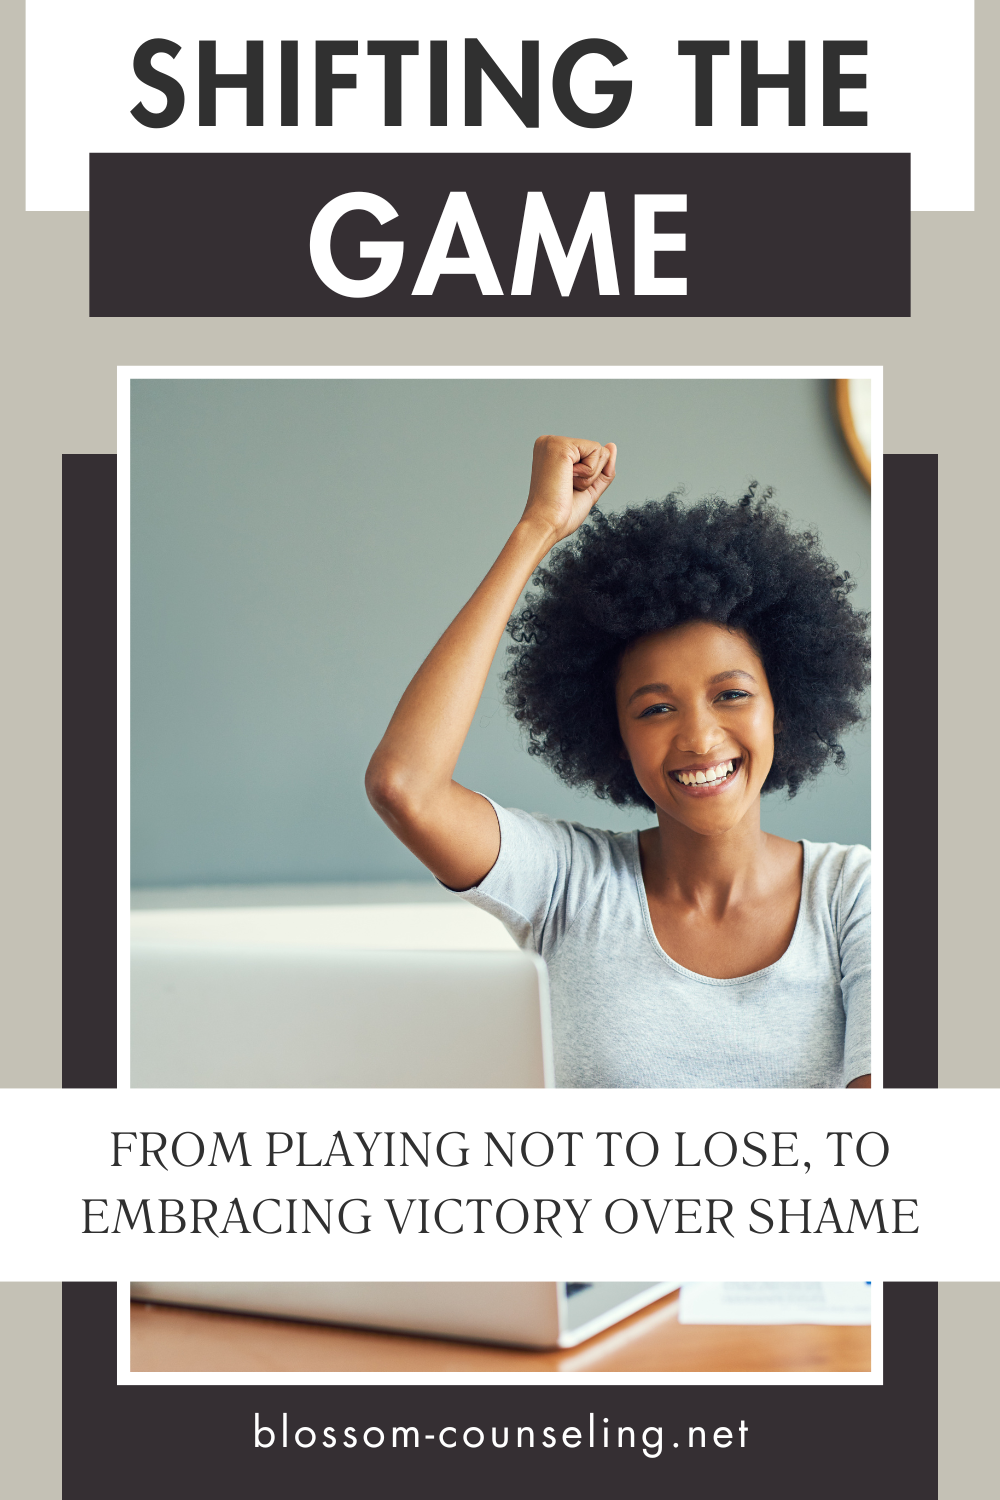 Shifting the Game: From Playing Not to Lose, to Embracing Victory Over Shame